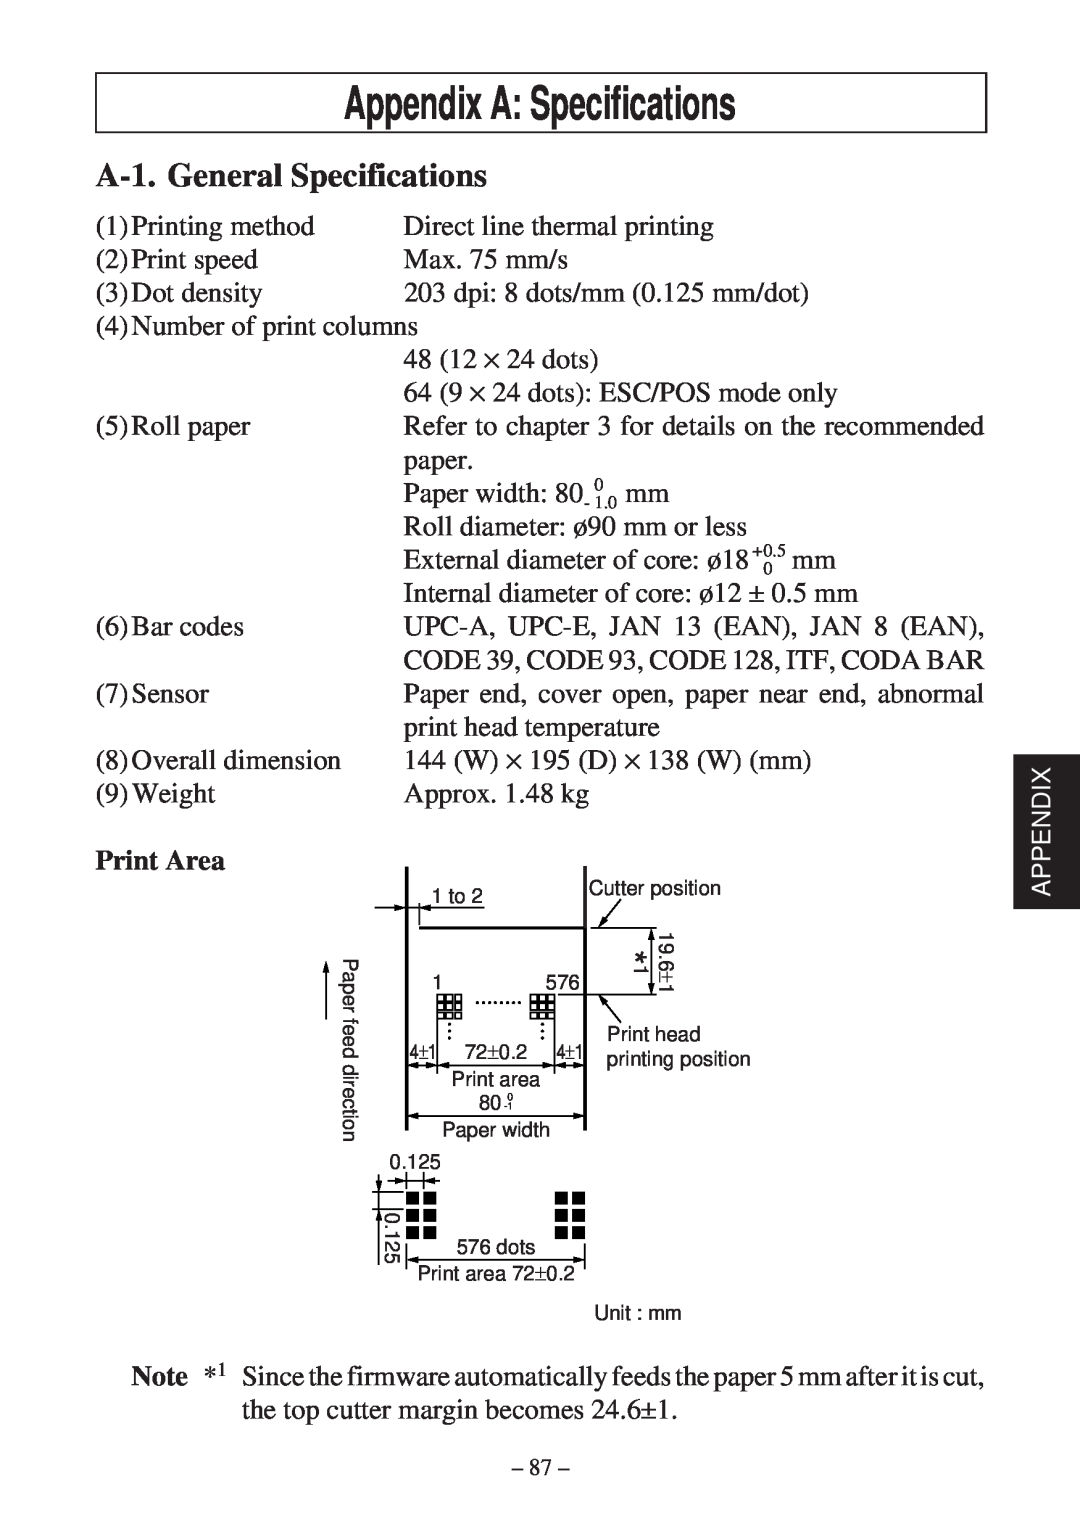 Star Micronics TSP2000 user manual Appendix A Specifications, A-1. General Specifications, Print Area 